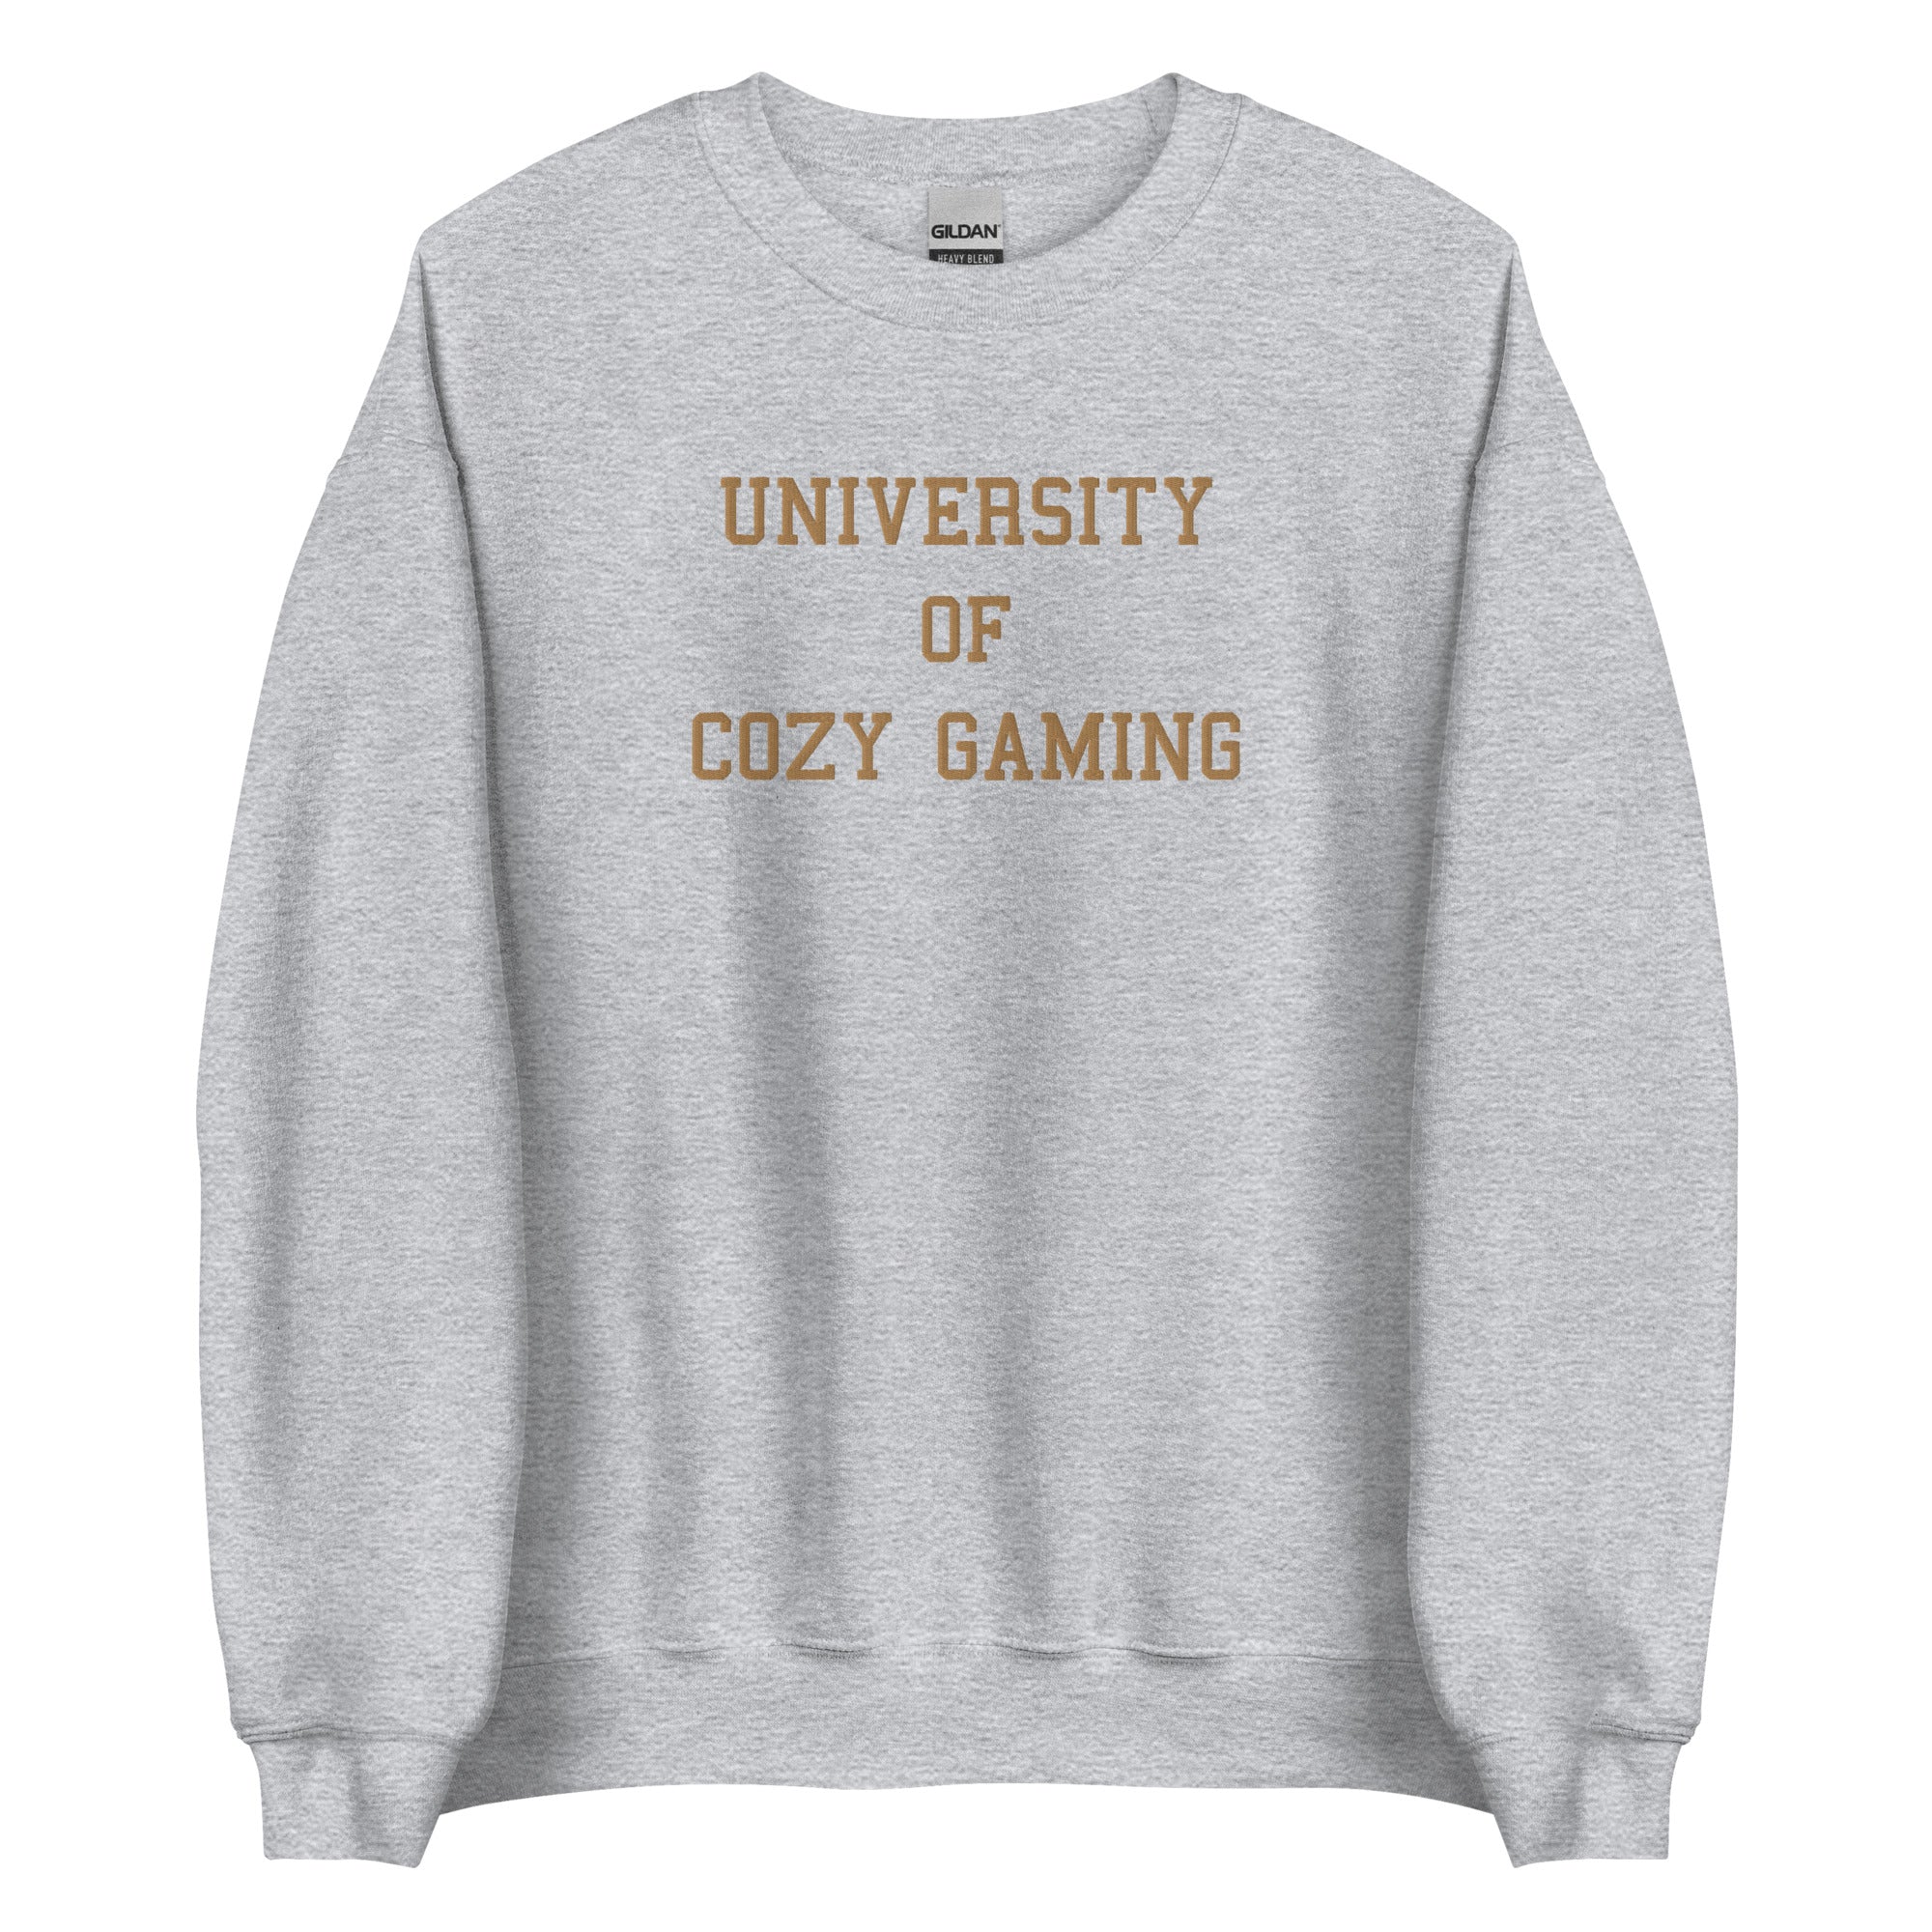 University of Cozy Gaming | Embroidered Unisex Sweatshirt | Coy Gamer Threads and Thistles Inventory Sport Grey S 